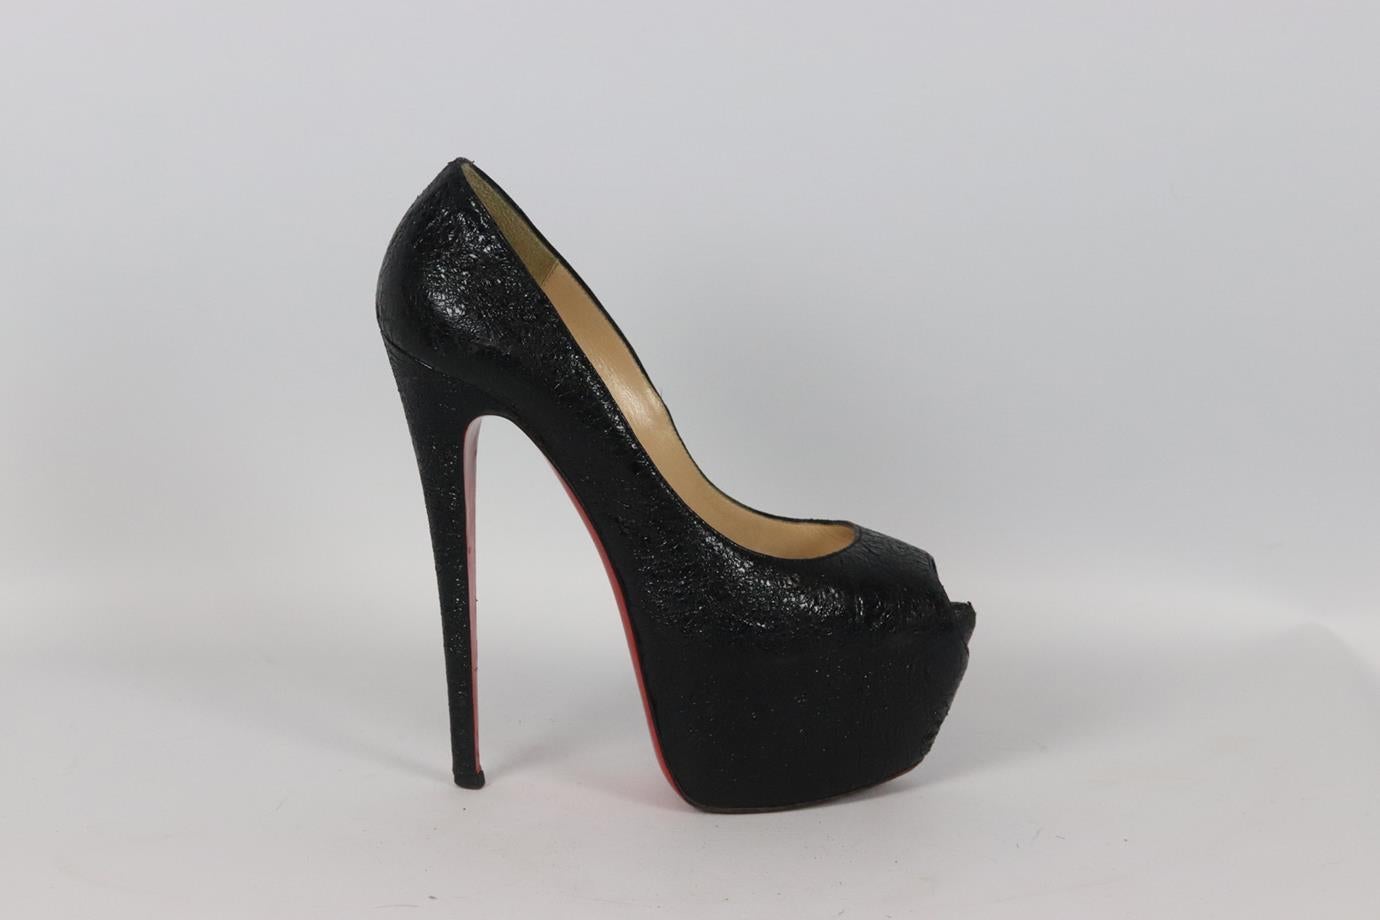 Christian Louboutin textured leather platform pumps. Black. Slips on. Does not come with dustbag or box. Size: EU 39 (UK 6, US 9). Insole: 9.6 in. Heel Height: 5 in. Platform: 2.4 in. Good condition - Wear to soles, toe and heel; see pictures.